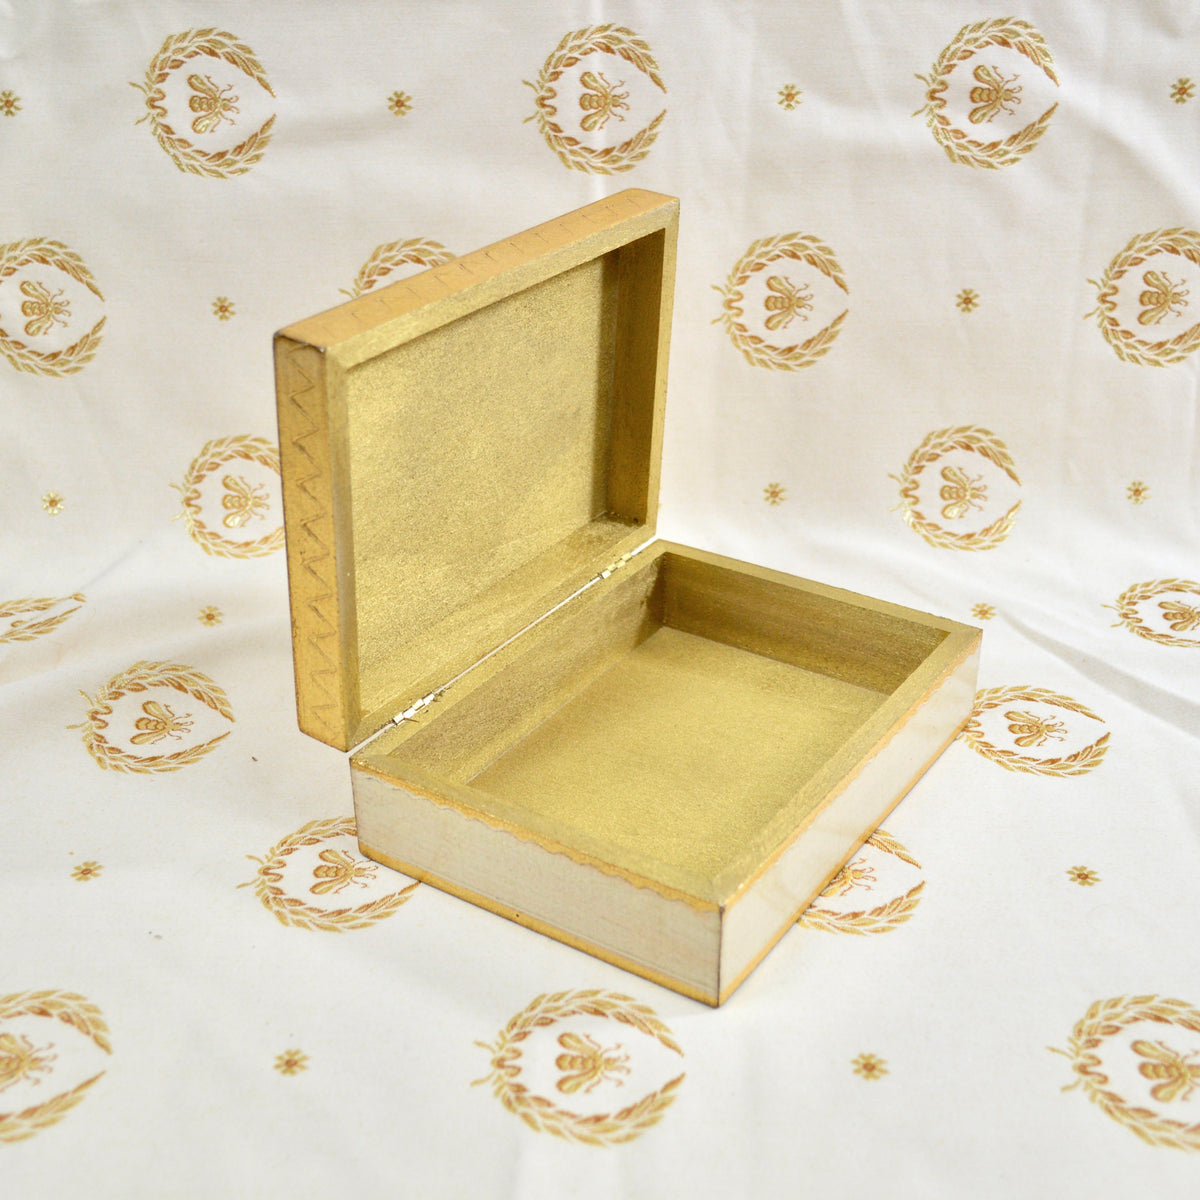 Florentine Gilded Wood Storage Box, Rectangle, Small, Made In Italy - My Italian Decor